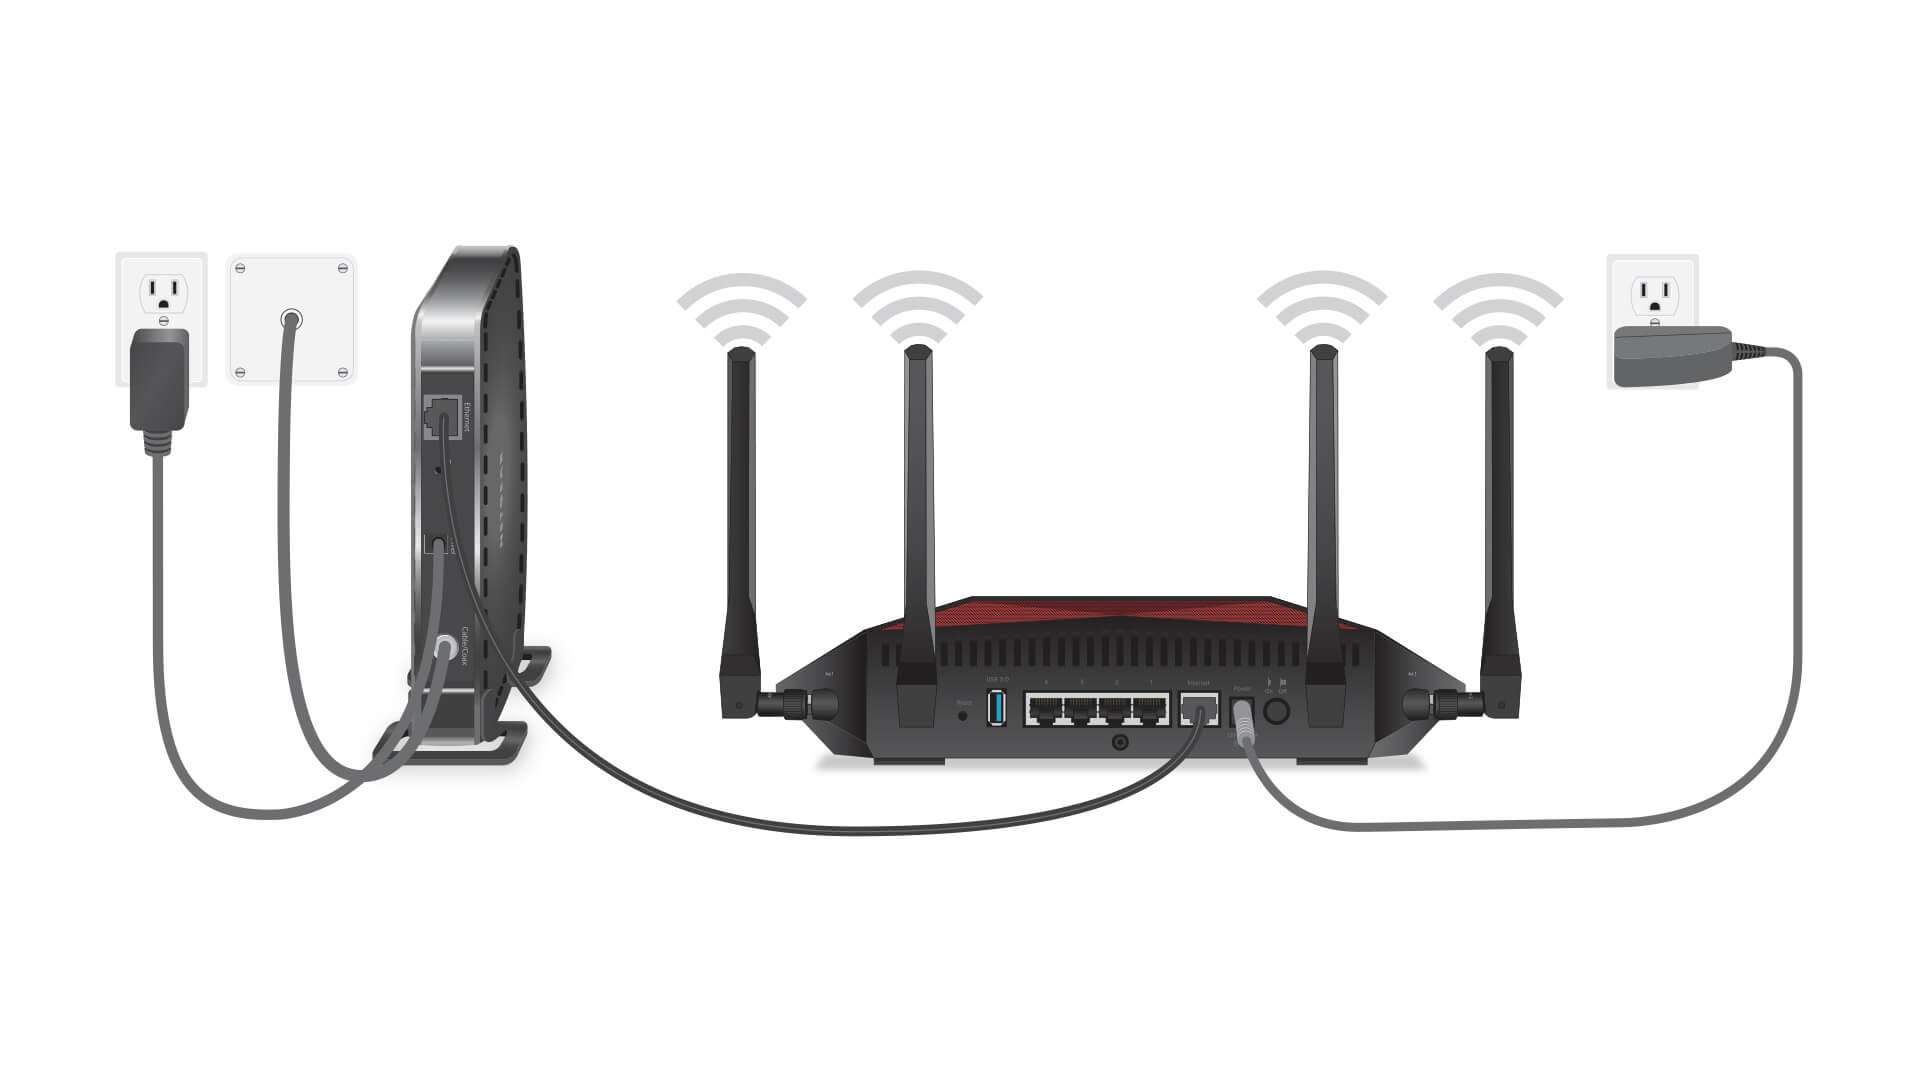 Locomotief Wreed Selectiekader How To Set Up Your WiFi Router For Gaming